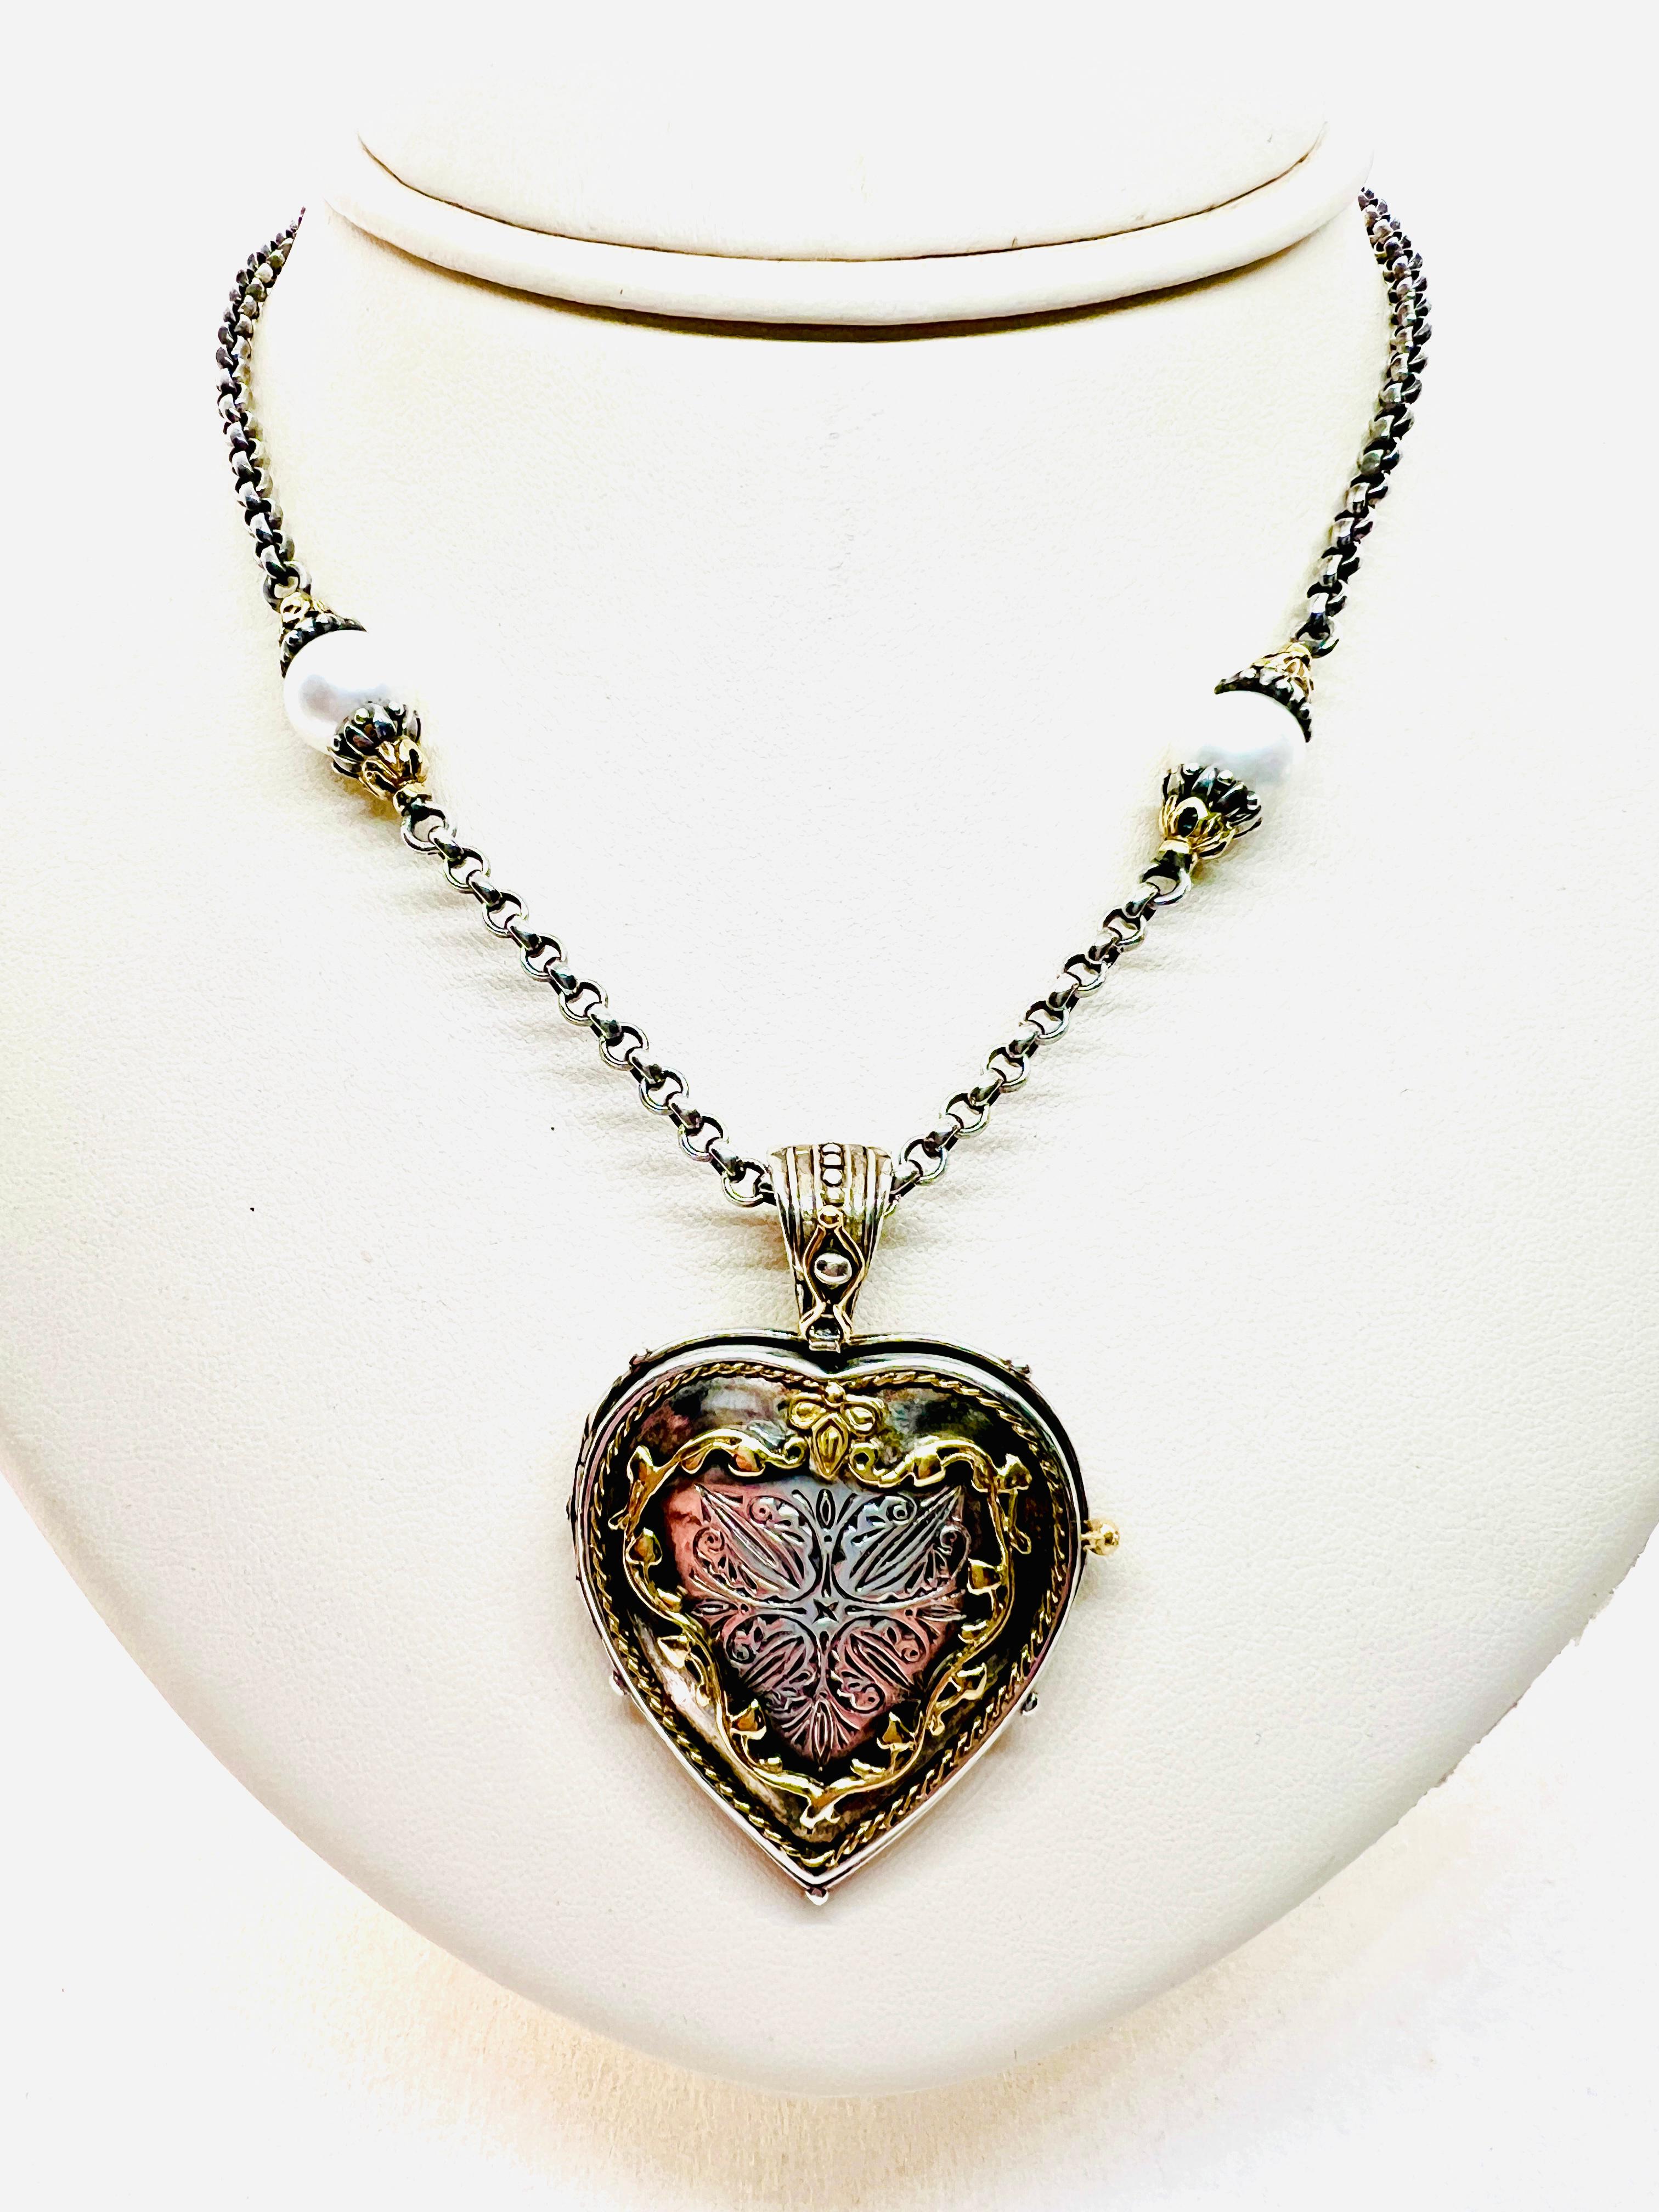 Gorgeous Konstantino Necklace with heart locket pendant / enhancer. the necklace is in 18 k Yellow gold and sterling silver. It features 4 , 8mm pearl stations. The heart pendant / enhancer measures 2 inches by 1.5 inches. The heart is stamped